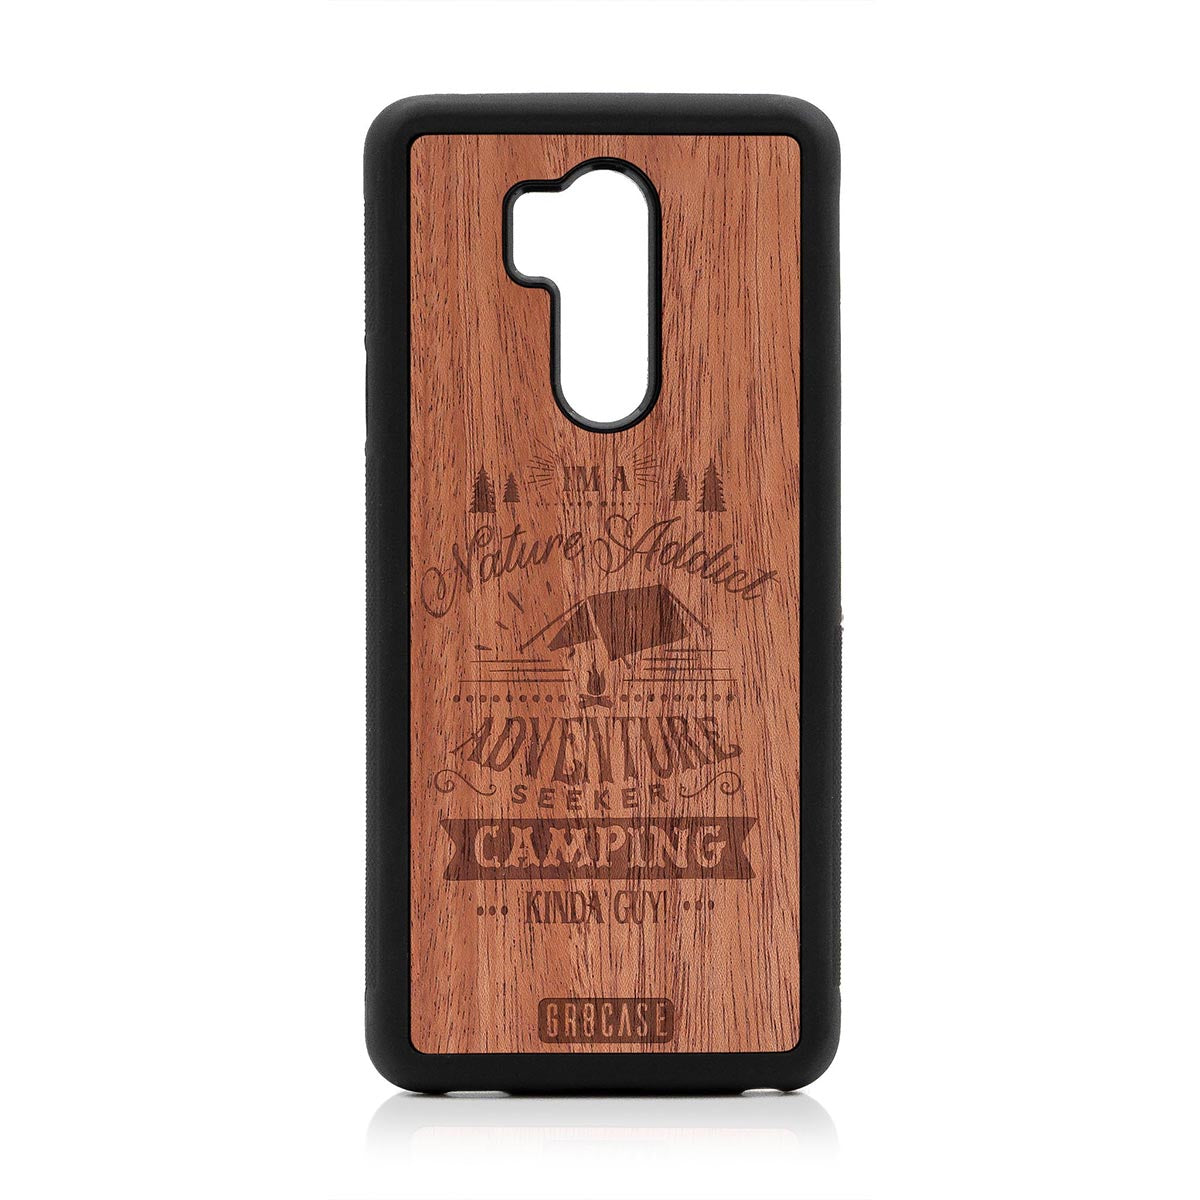 I'm A Nature Addict Adventure Seeker Camping Kinda Guy Design Wood Case LG G7 ThinQ by GR8CASE